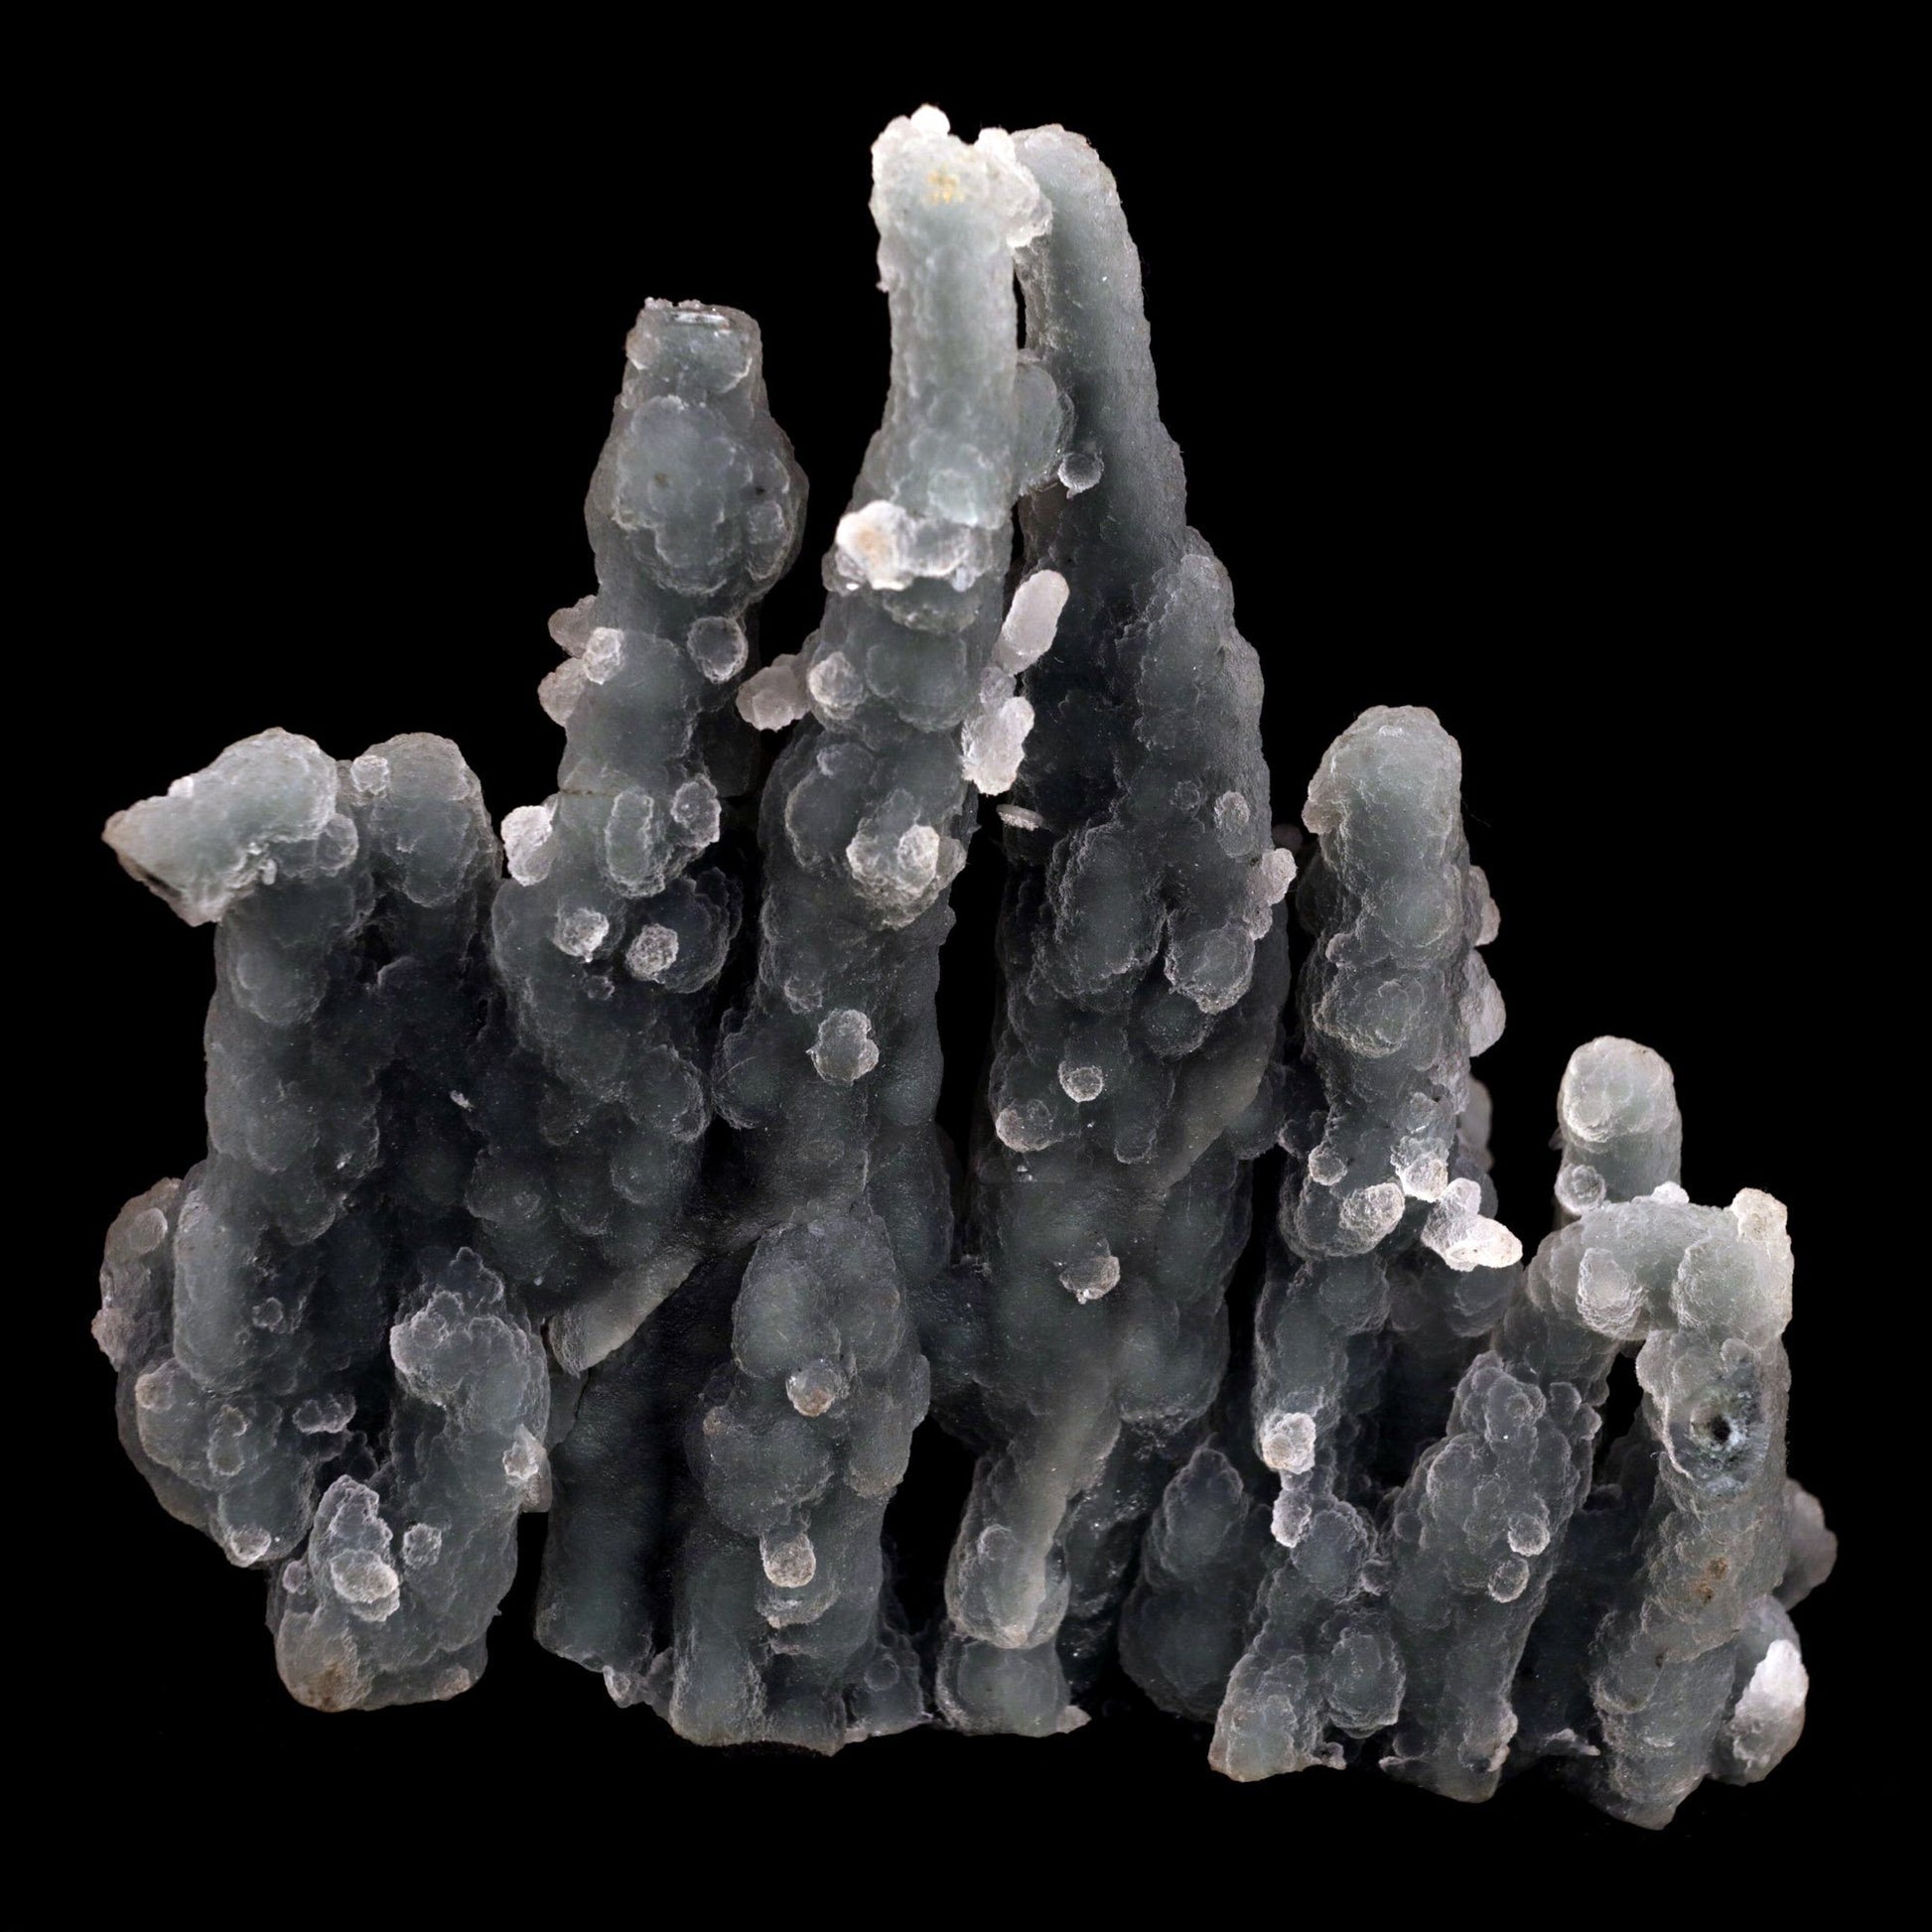 Chalcedony Coral Natural Mineral Specimen # B 4831  https://www.superbminerals.us/products/chalcedony-coral-natural-mineral-specimen-b-4831  Features: Magnificent specimen of delicate Chalcedony stalactites. The Chalcedony elongated structure is amazing. The stalactites are complete all over, colorless with milky white inclusions in the center, very sparkling and frosty. Many of them are doubly terminated. The Chalcedony stalactites are very lustrous